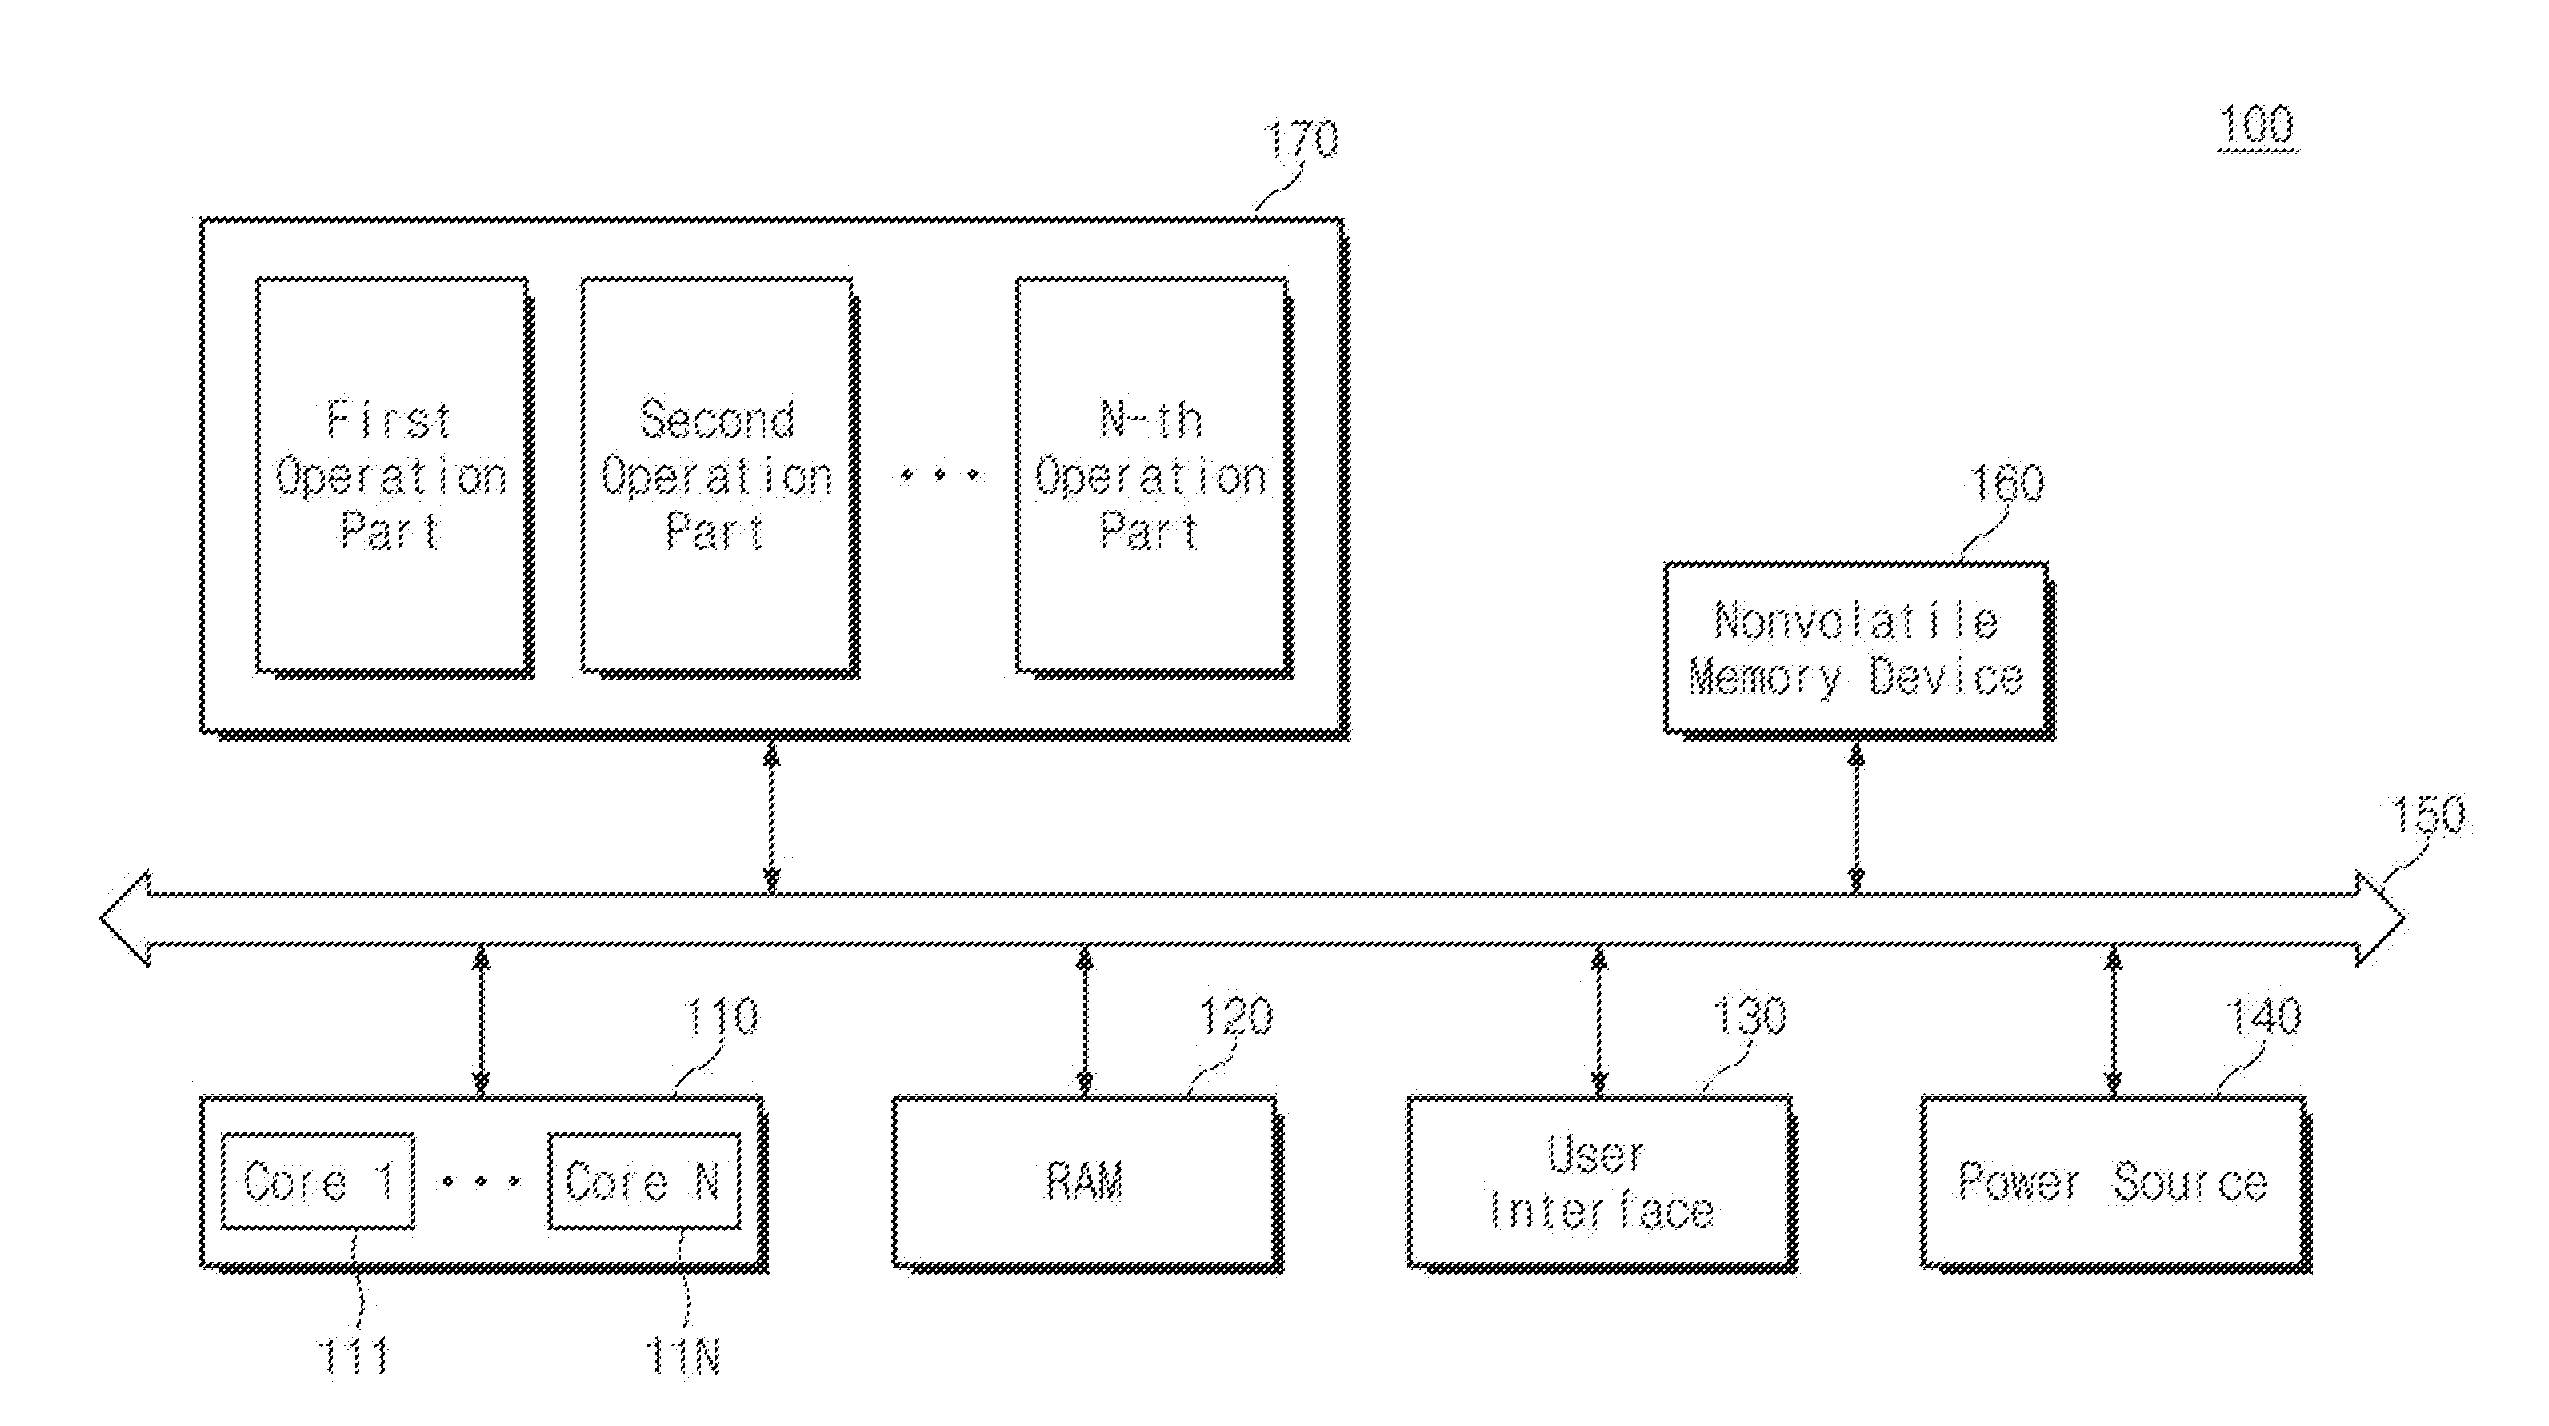 Central processing unit, GPU simulation method thereof, and computing system including the same